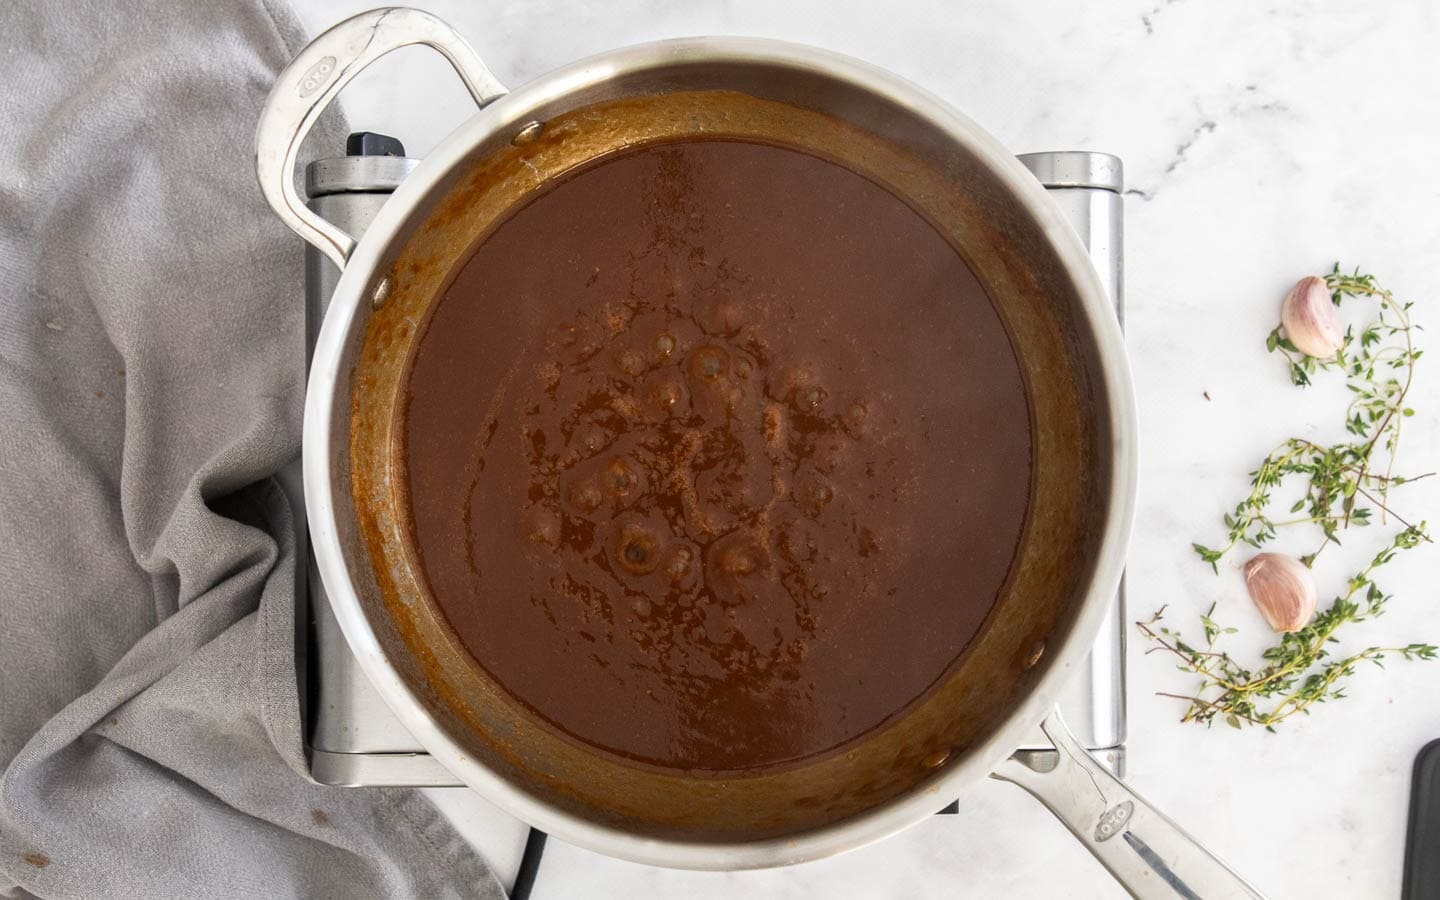 The gravy after being thickened, still simmering in a pan.